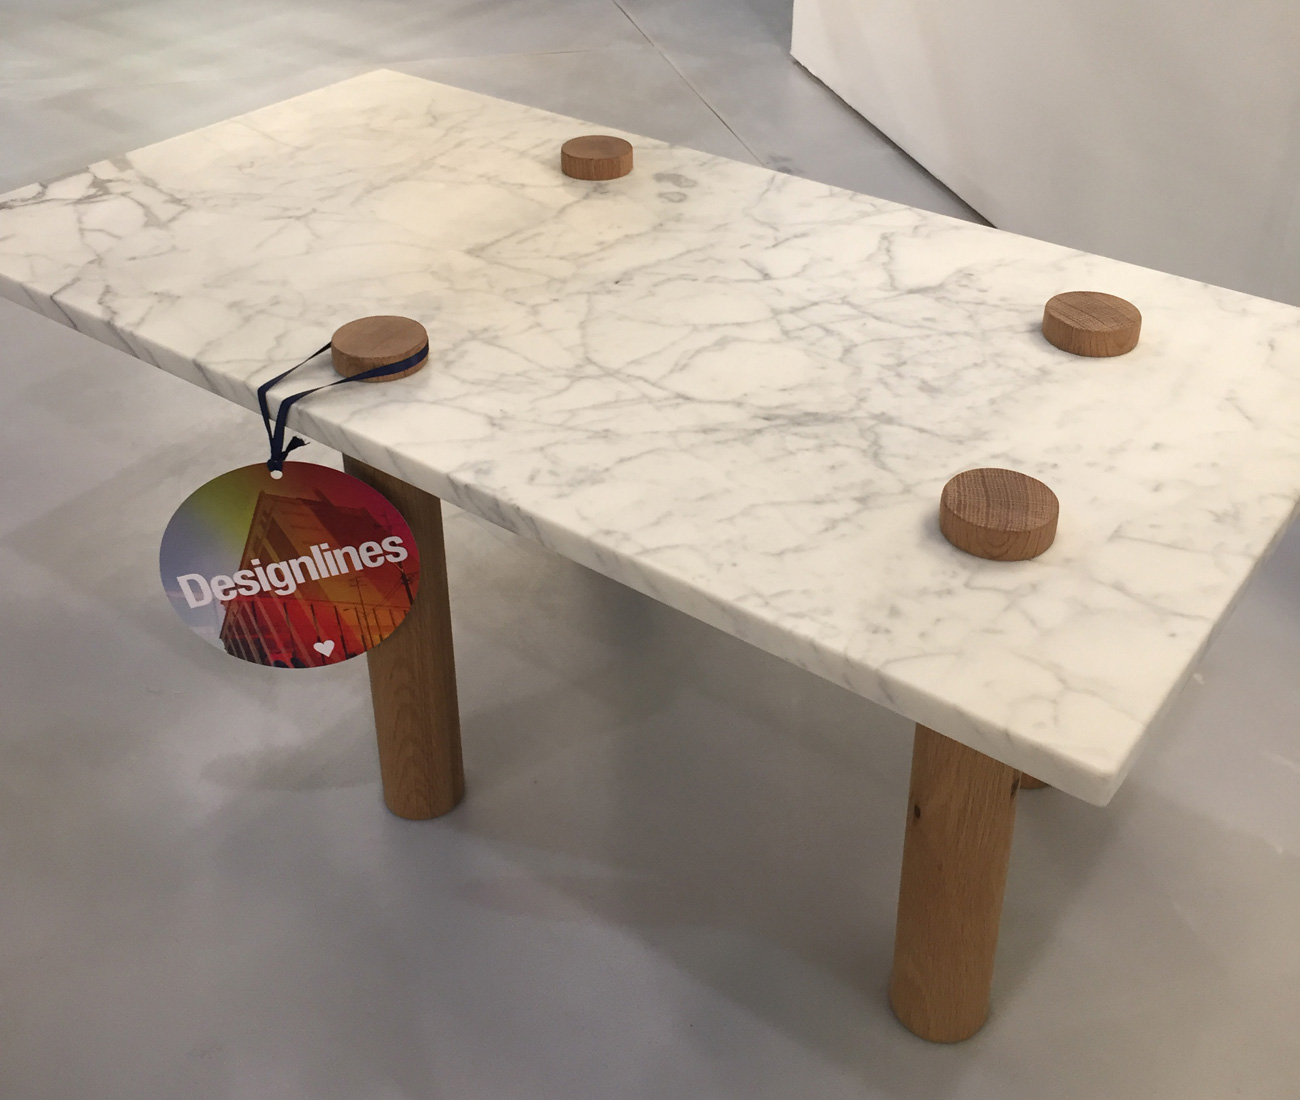 Polar Bear by Hollis + Morris. Bear with him: Just released by Hollis + Morris, the Toronto design studio headed by Mischa Couvrette, this playful marble-top coffee table with cylindrical wooden legs is meant to evoke a polar bear.